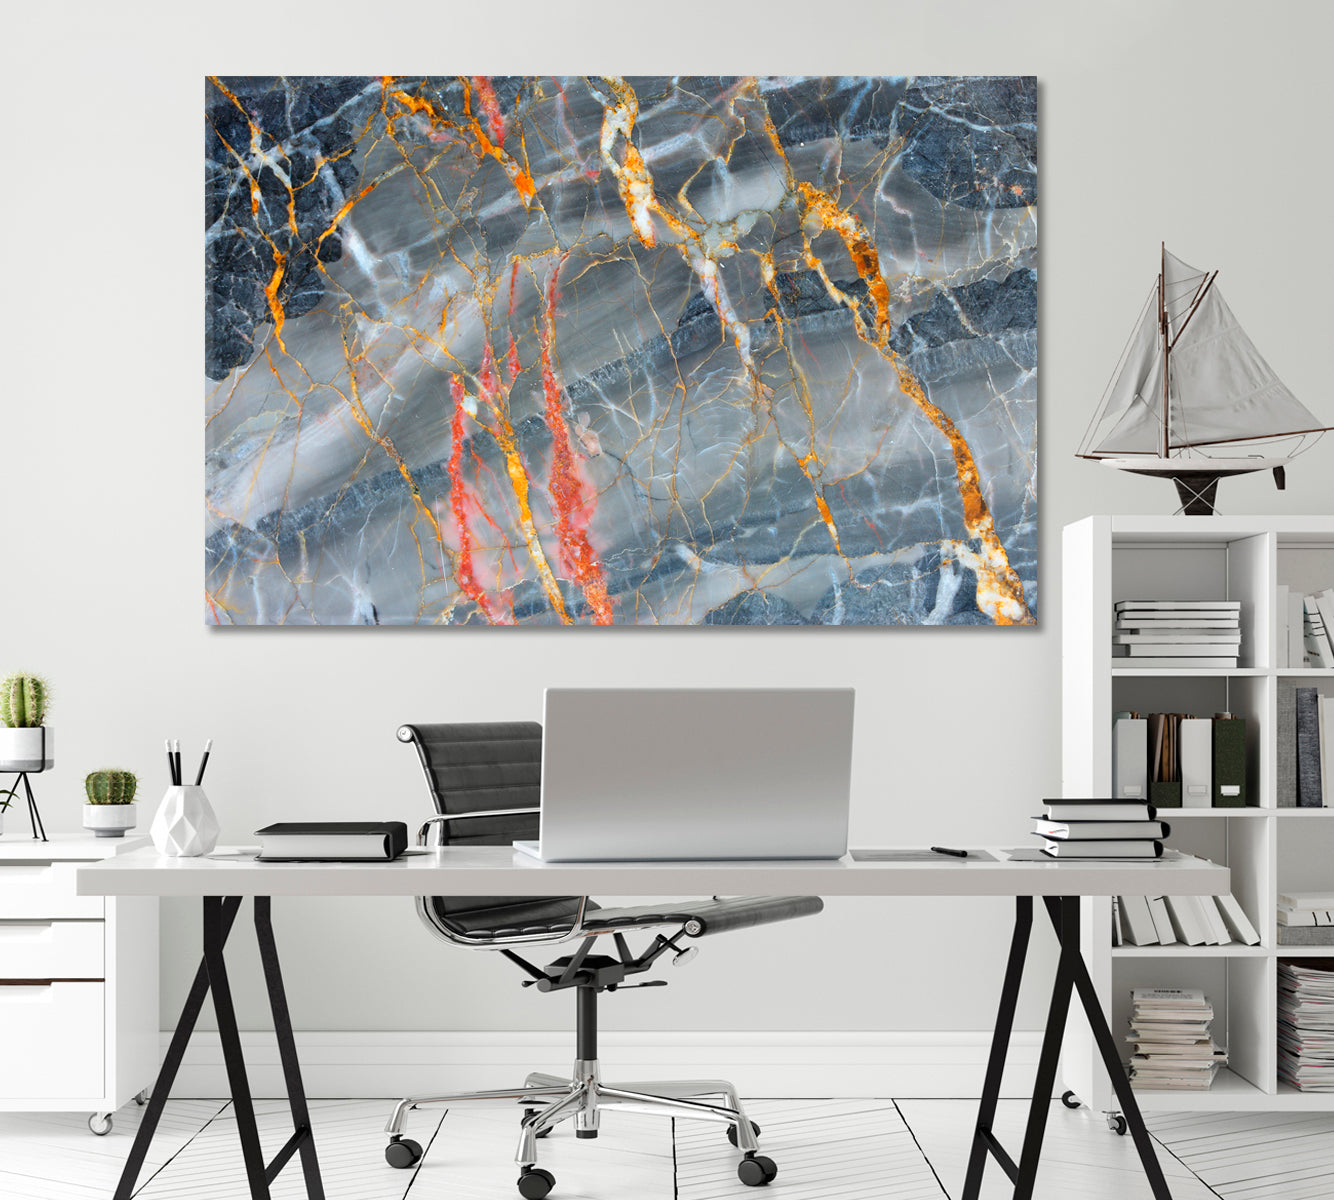 Gray Marble with Yellow and Red Strokes Canvas Print-Canvas Print-CetArt-1 Panel-24x16 inches-CetArt